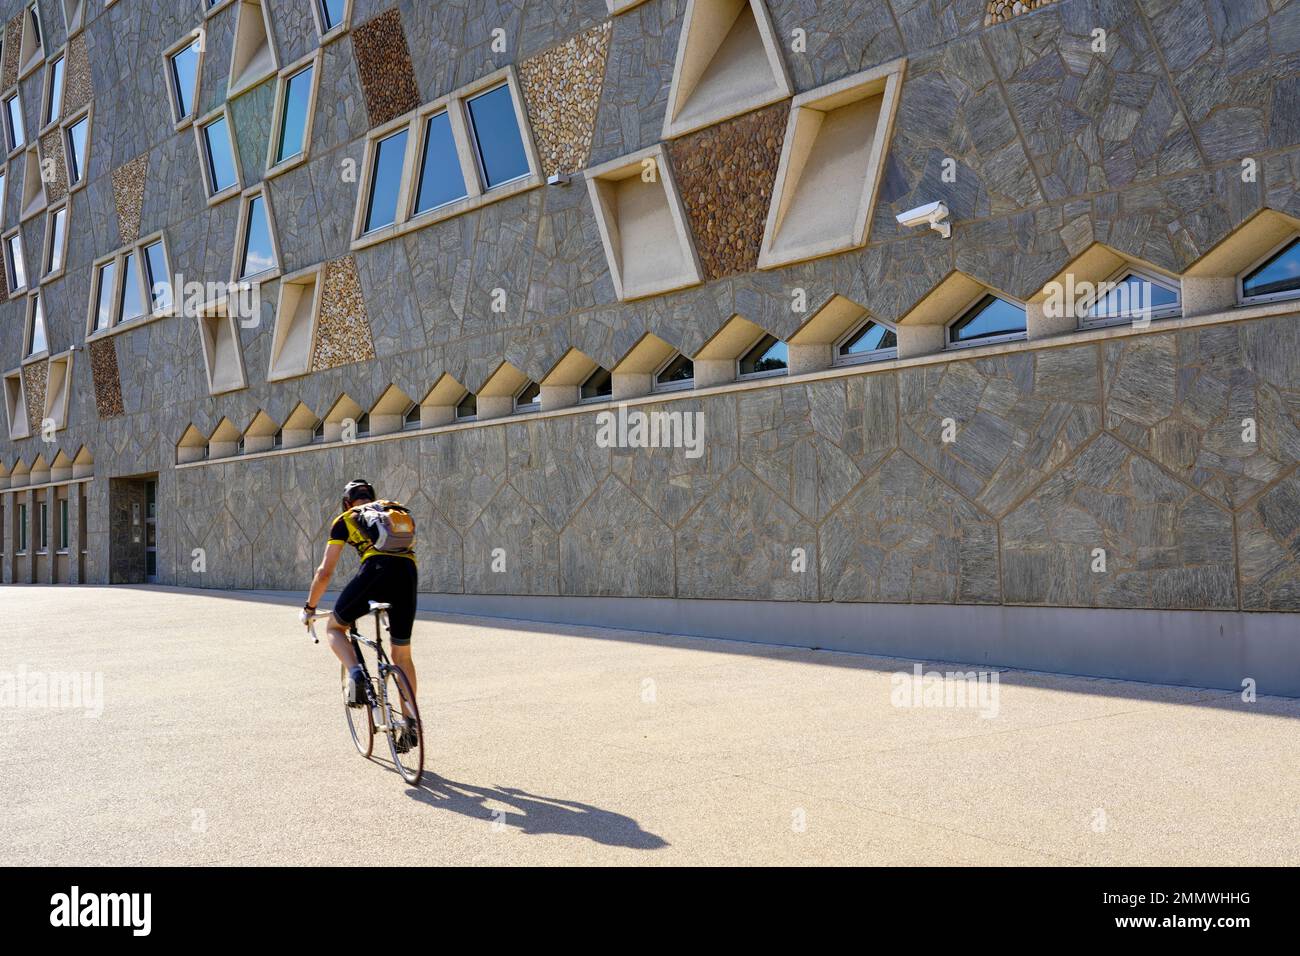 A cyclist rides on the sidewalk in front of the facade of the Grand Théâtre de la Ville de Luxembourg. Stock Photo